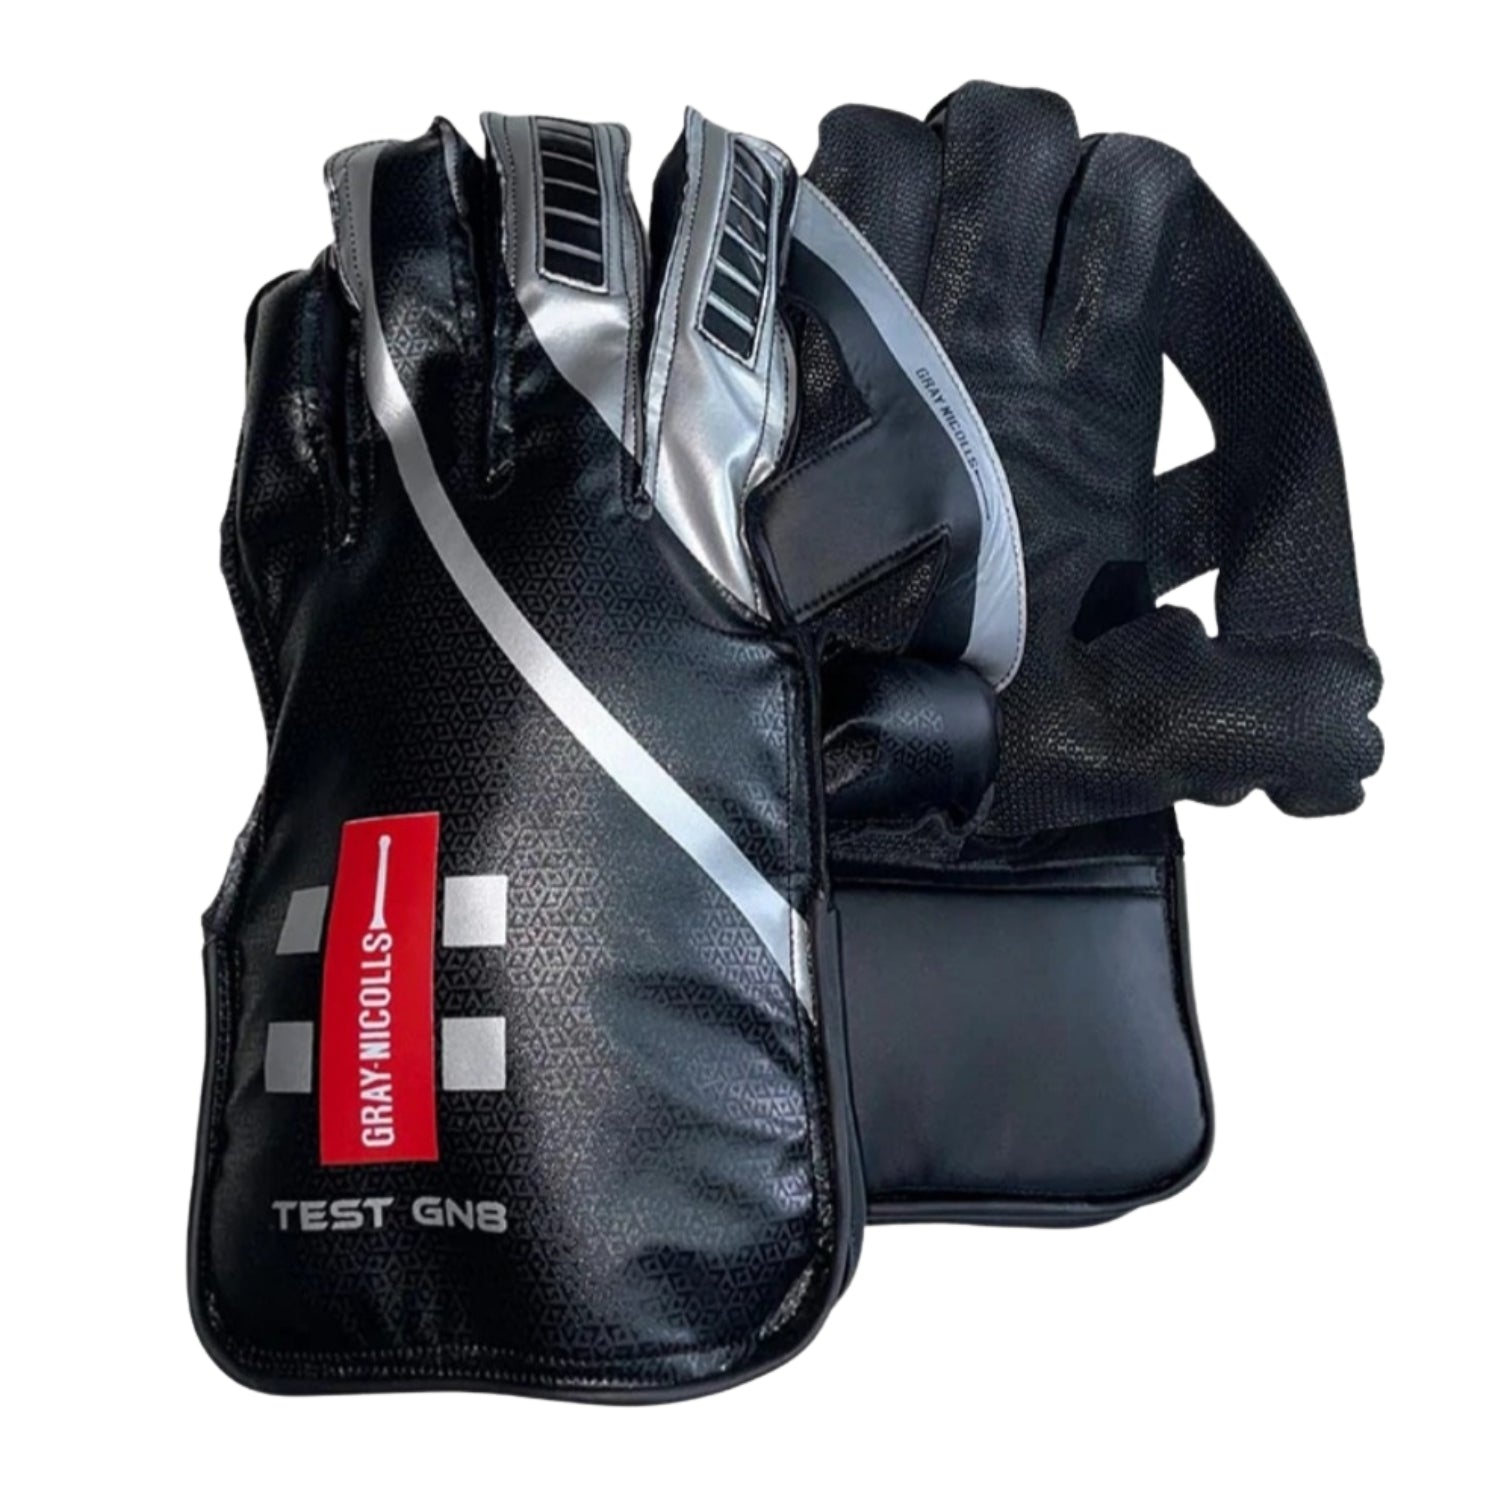 Gray Nicolls Wicket Keeping Gloves, Model GN8, Adult